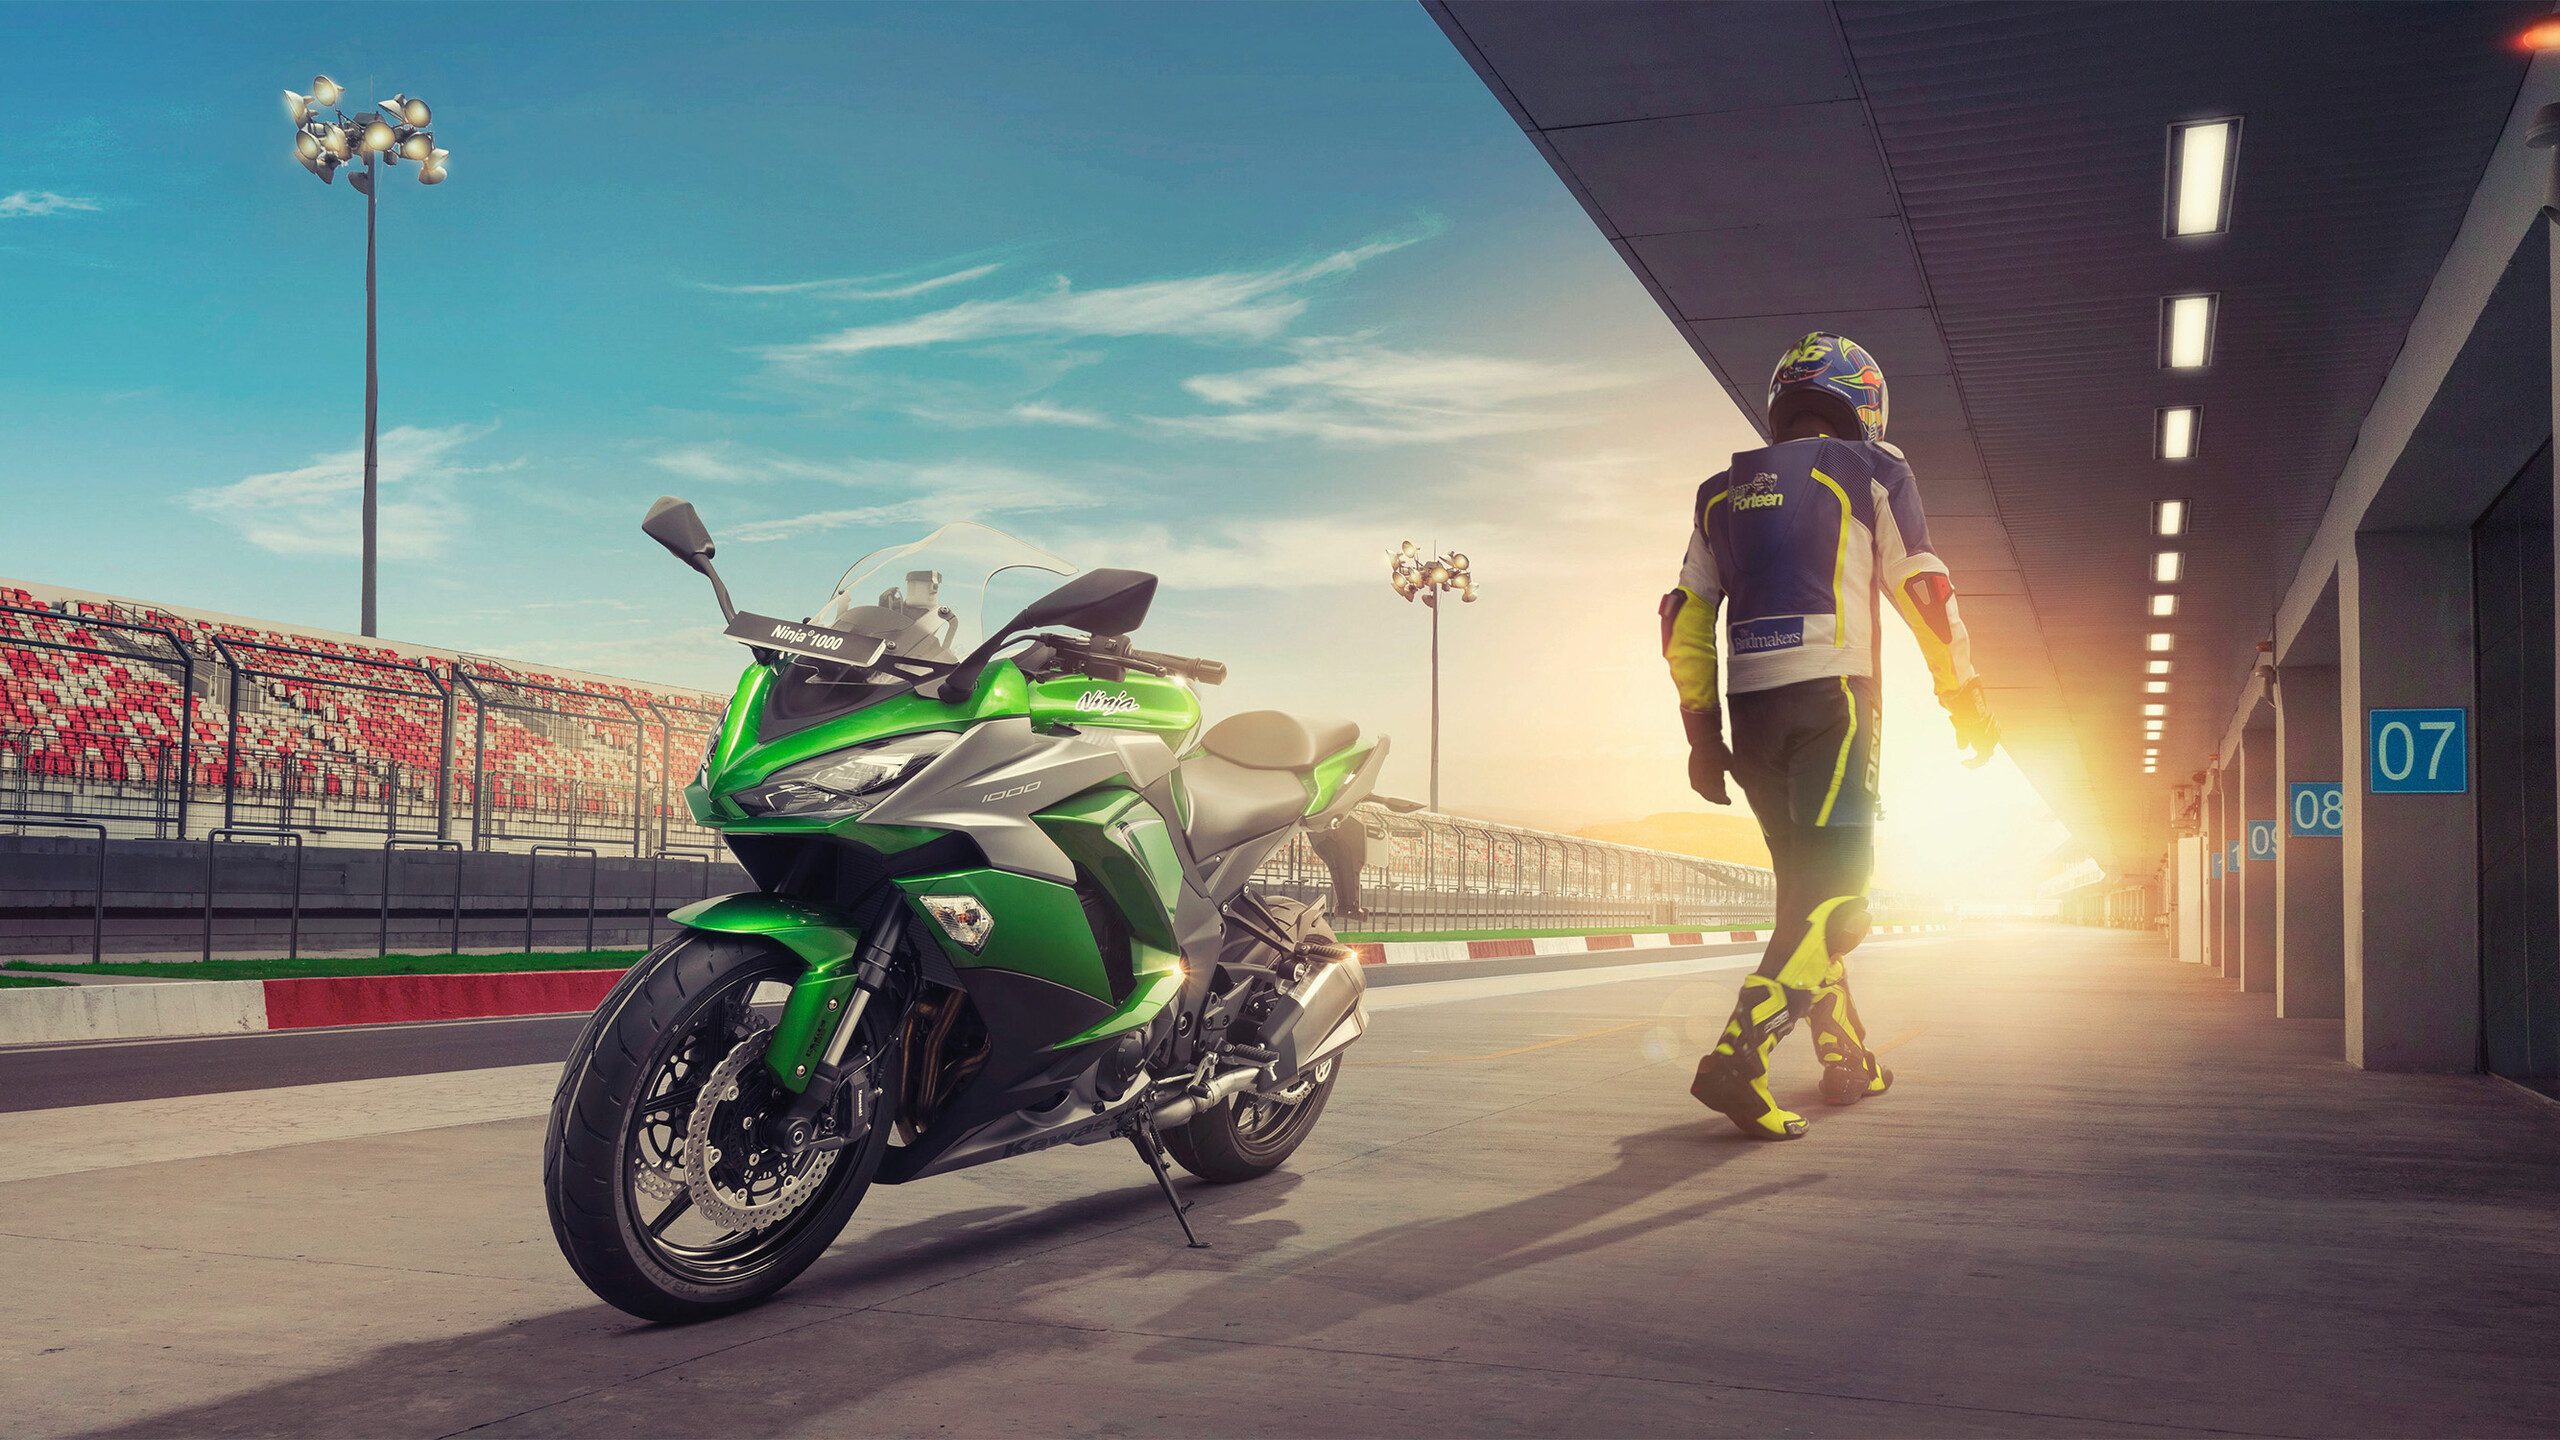 X kawasaki ninja p resolution hd k wallpapers images backgrounds photos and pictures